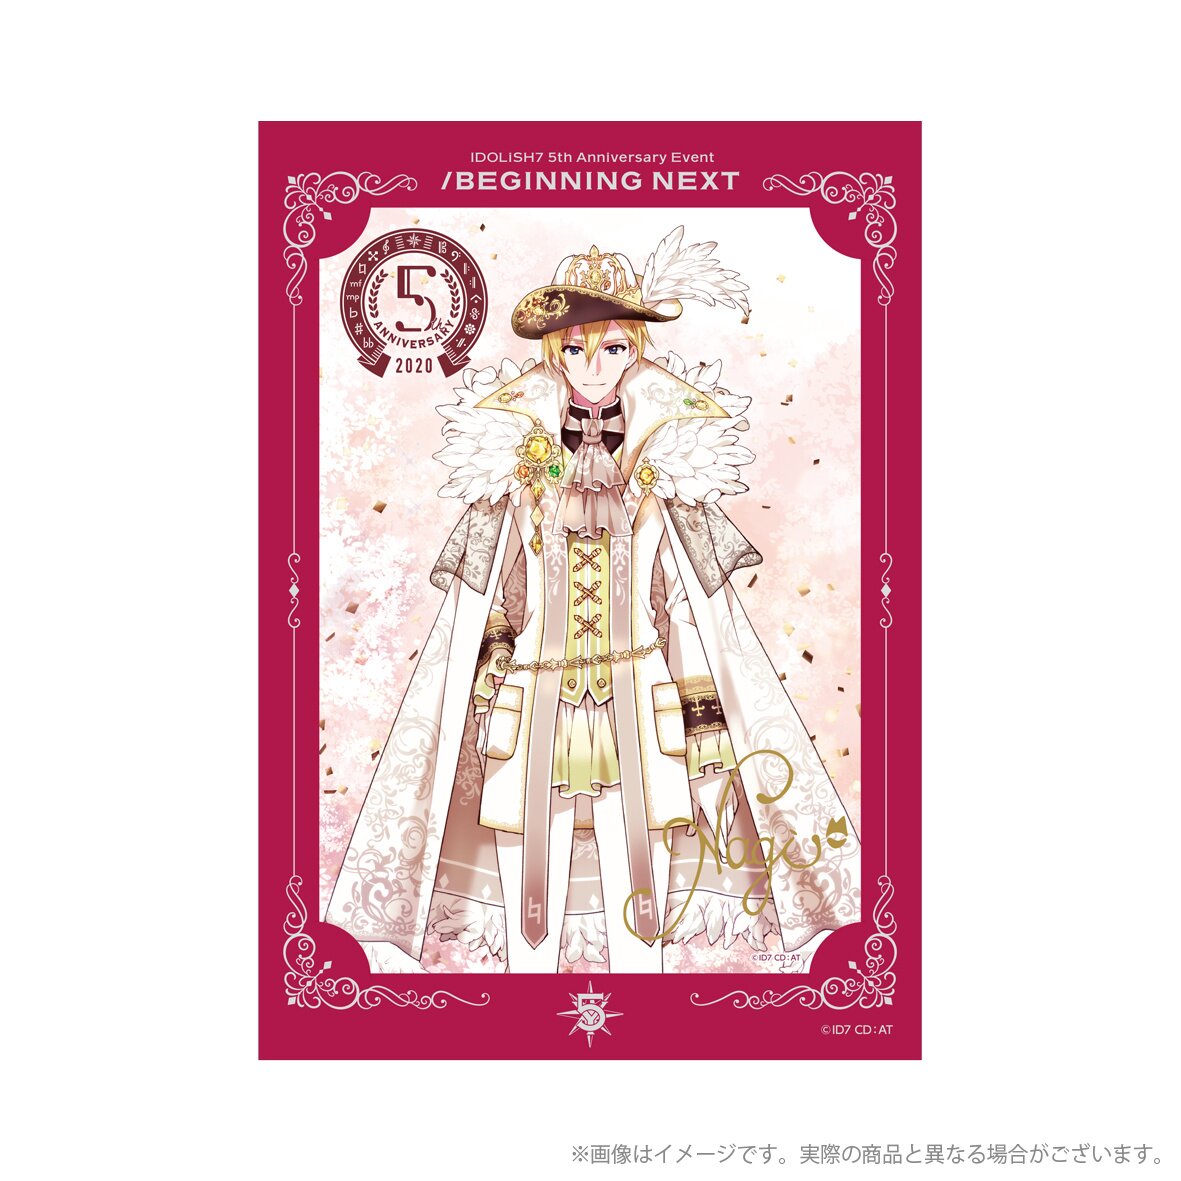 IDOLiSH7 5th Anniversary Event /BEGINNING NEXT Foil Stamped Autograph  Portrait Collection Vol. 1